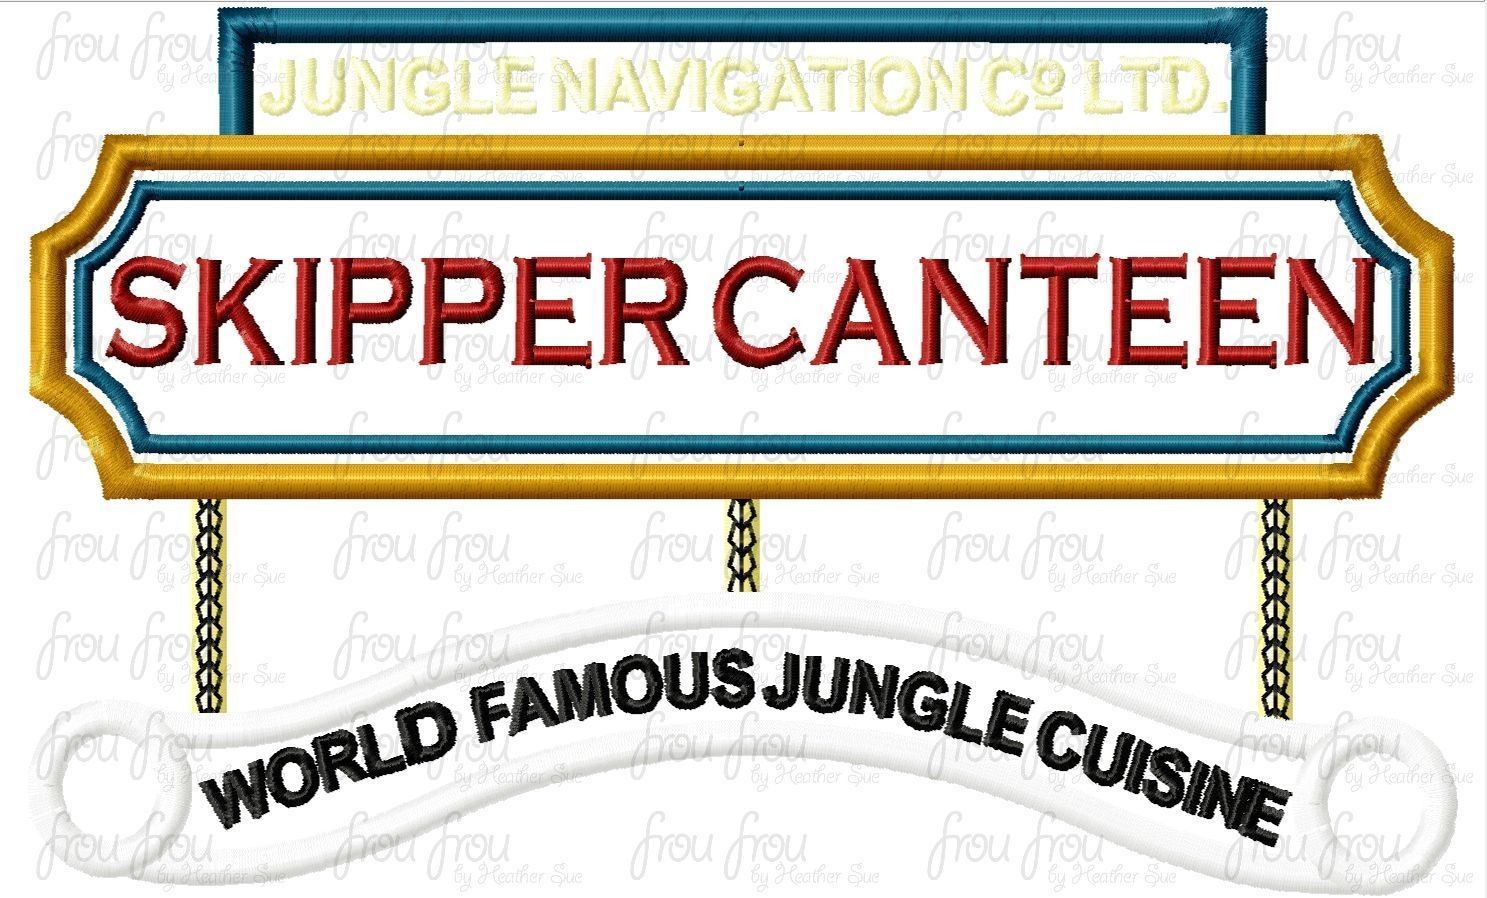 Skipper's Canteen Restaurant Logo Wording Machine Applique Embroidery Design, multiple sizes including 3"-16"